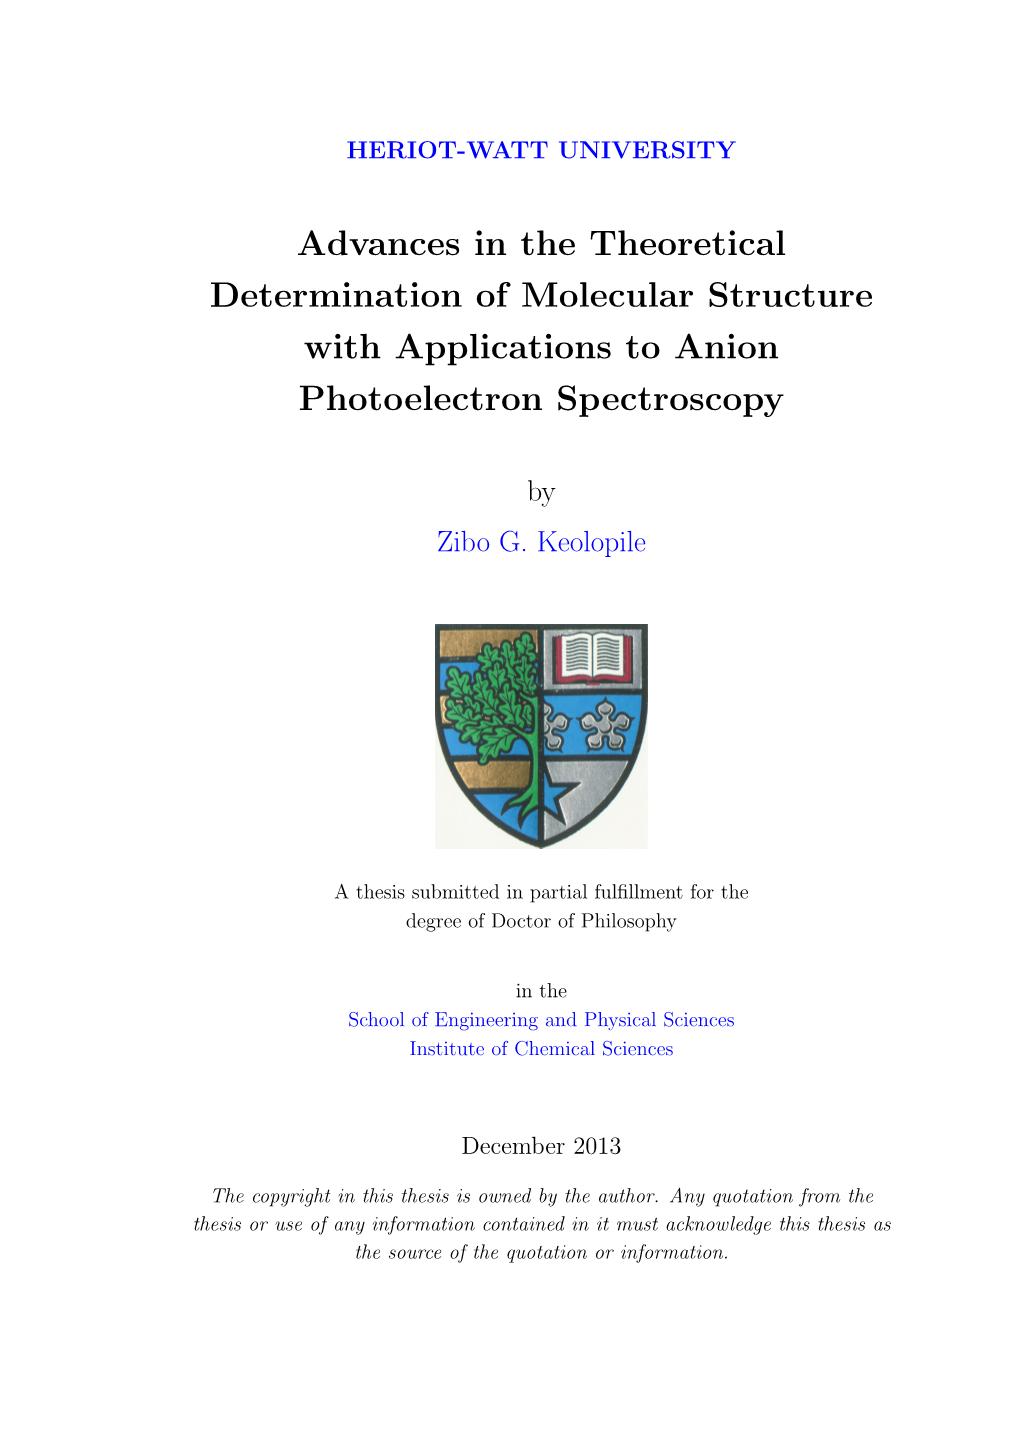 Advances in the Theoretical Determination of Molecular Structure with Applications to Anion Photoelectron Spectroscopy